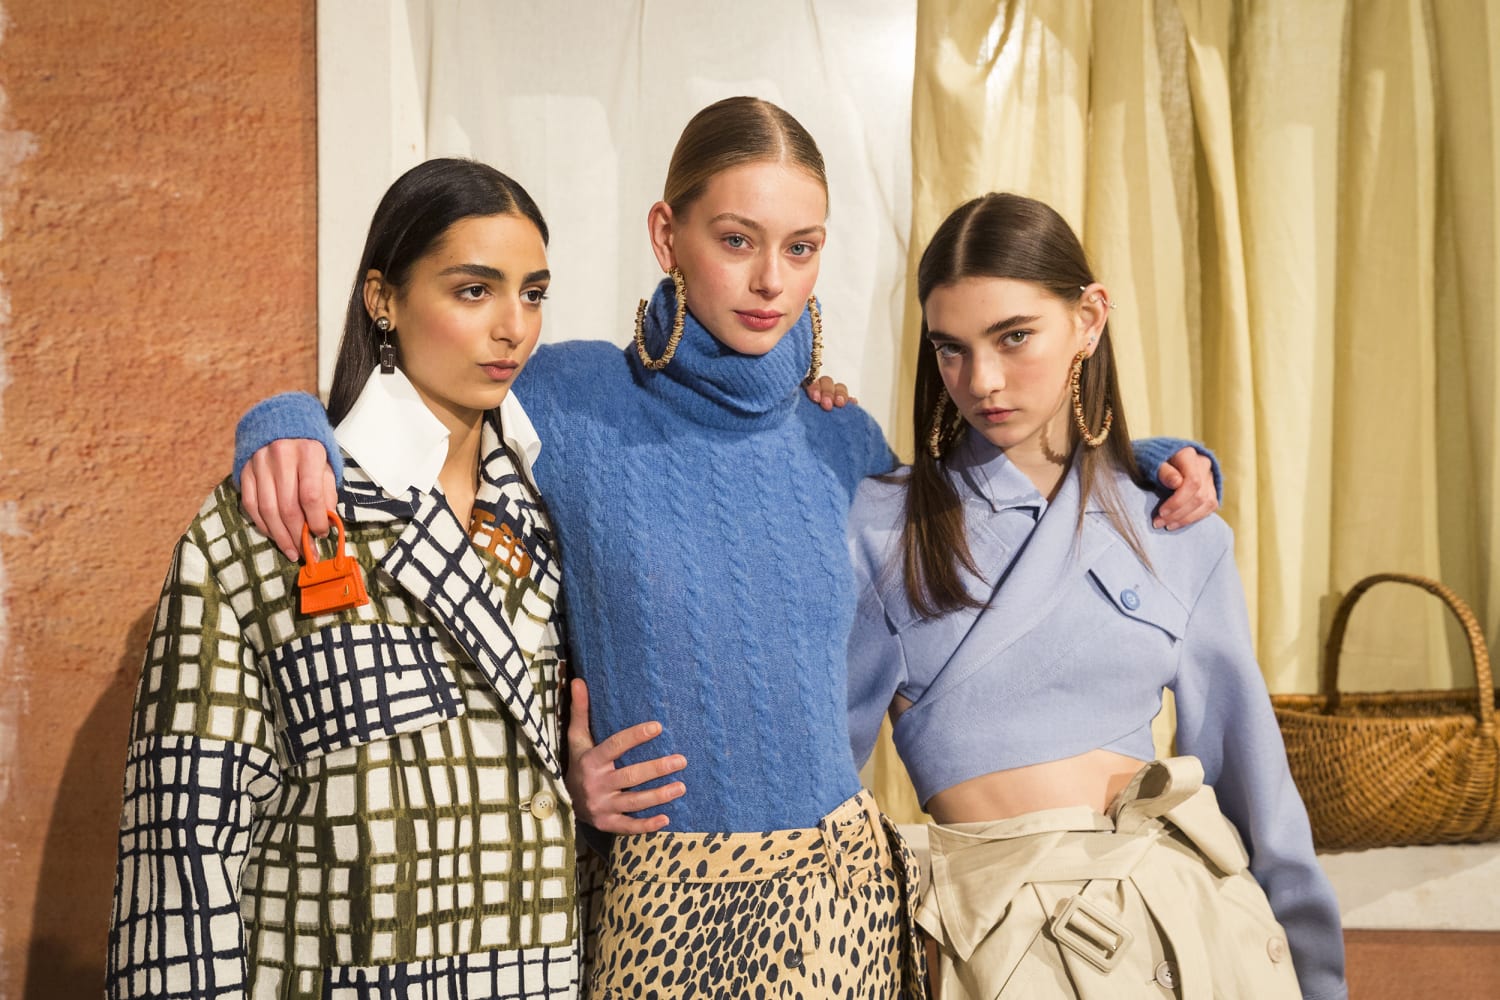 Everything You Need To Know About Jacquemus' Buzzy Parisian Show